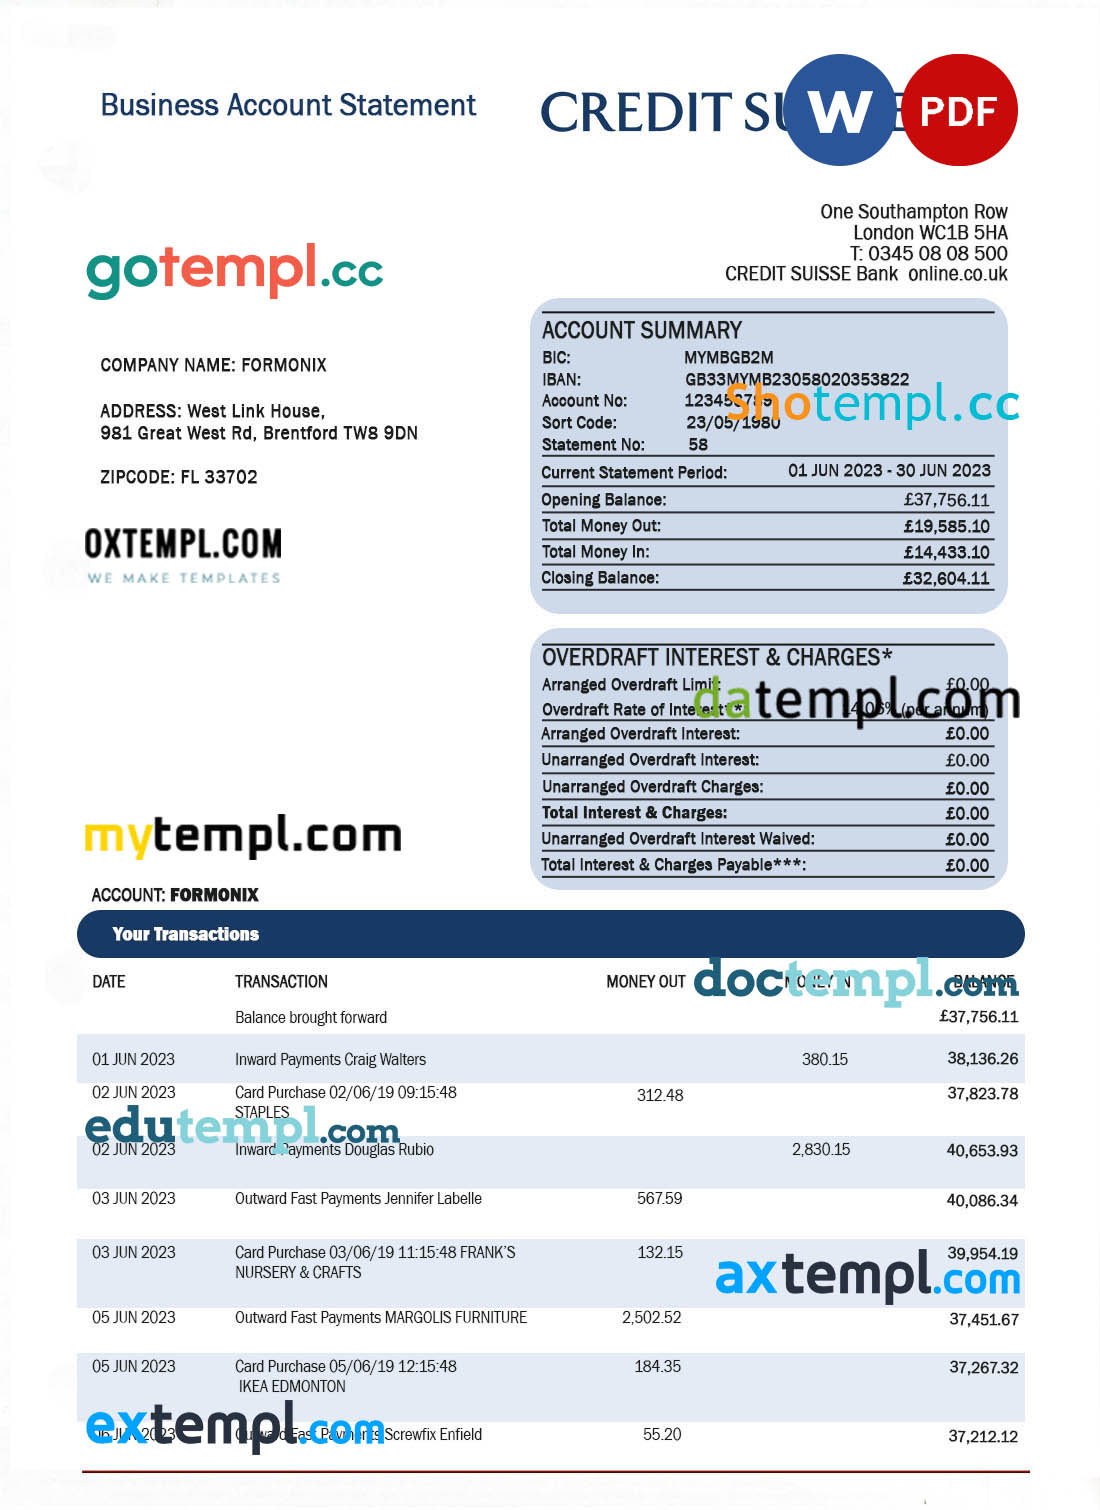 editable template, Credit Suisse bank corporate account statement Word and PDF template